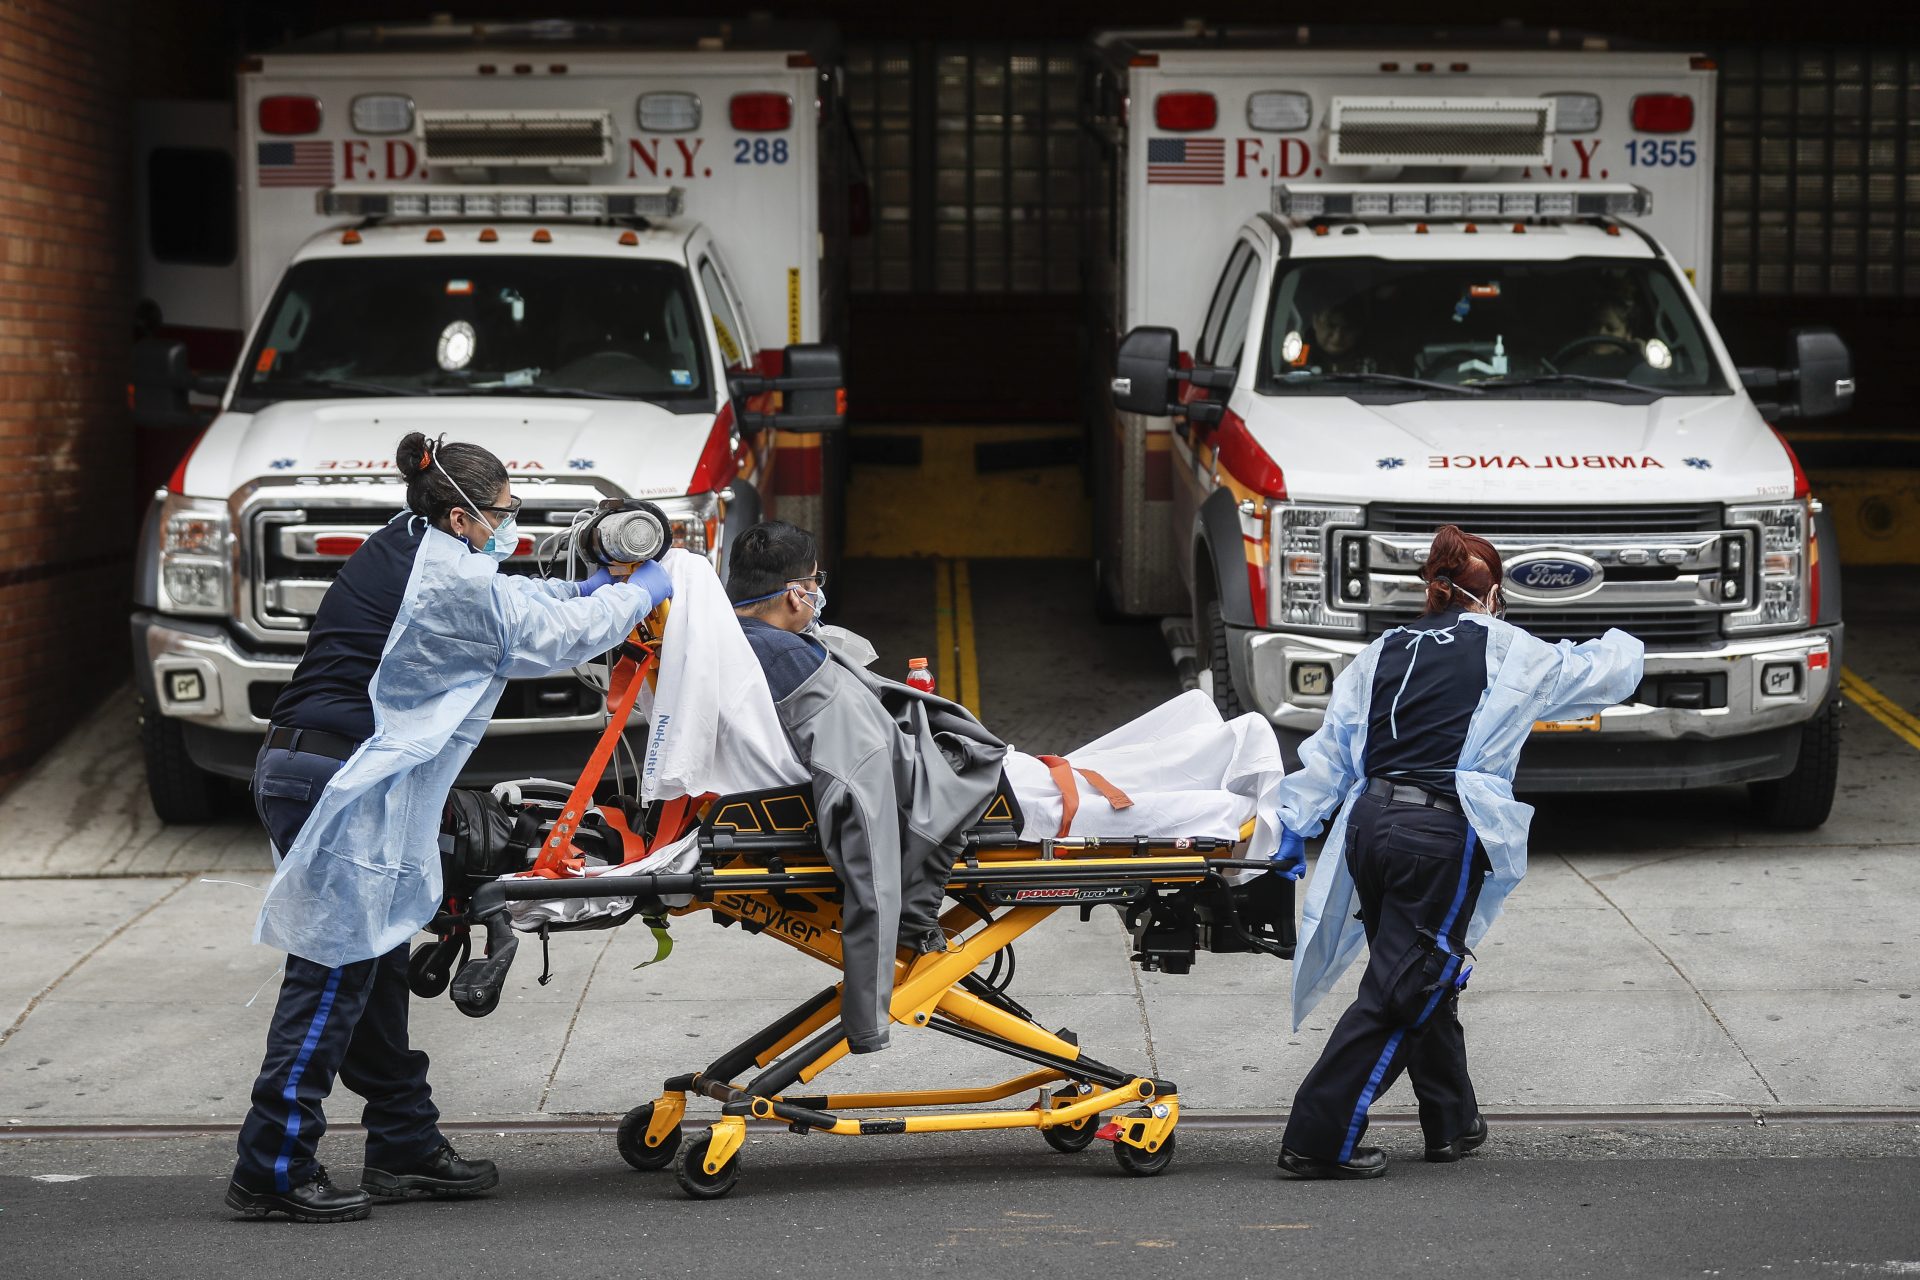 Patients are brought into Wyckoff Heights Medical Center in New York.